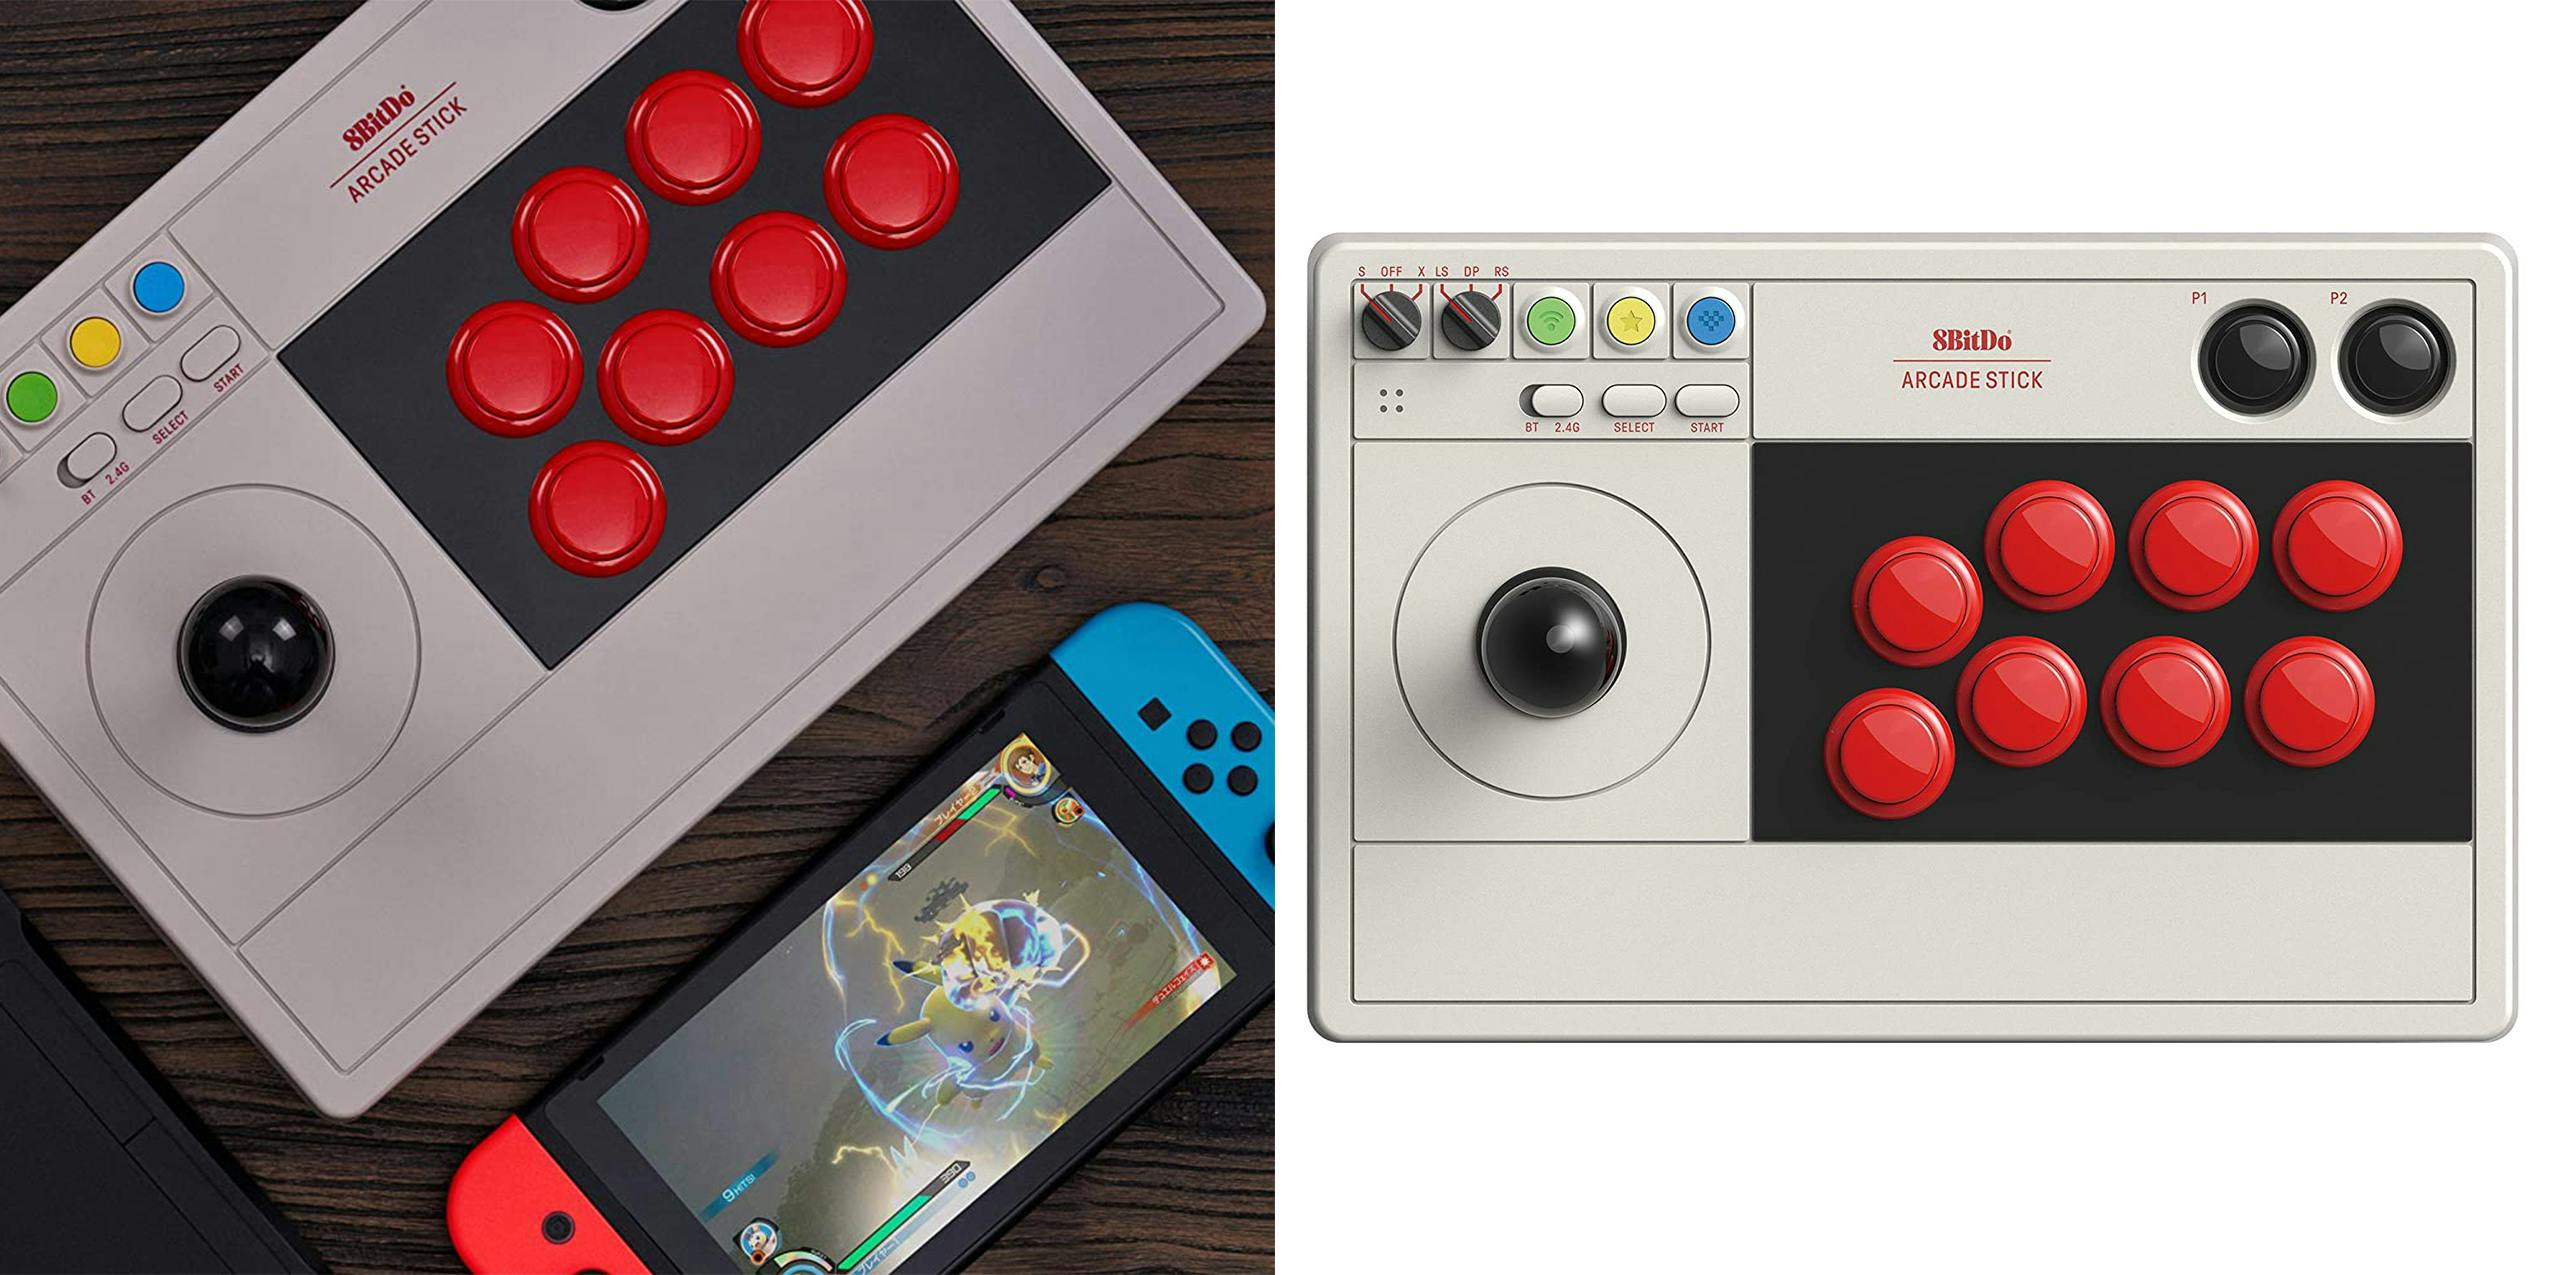 An 8BitDo Arcade Stick for Nintendo Switch on a wooden table along with a Switch console is one of the great gifts for nerds.